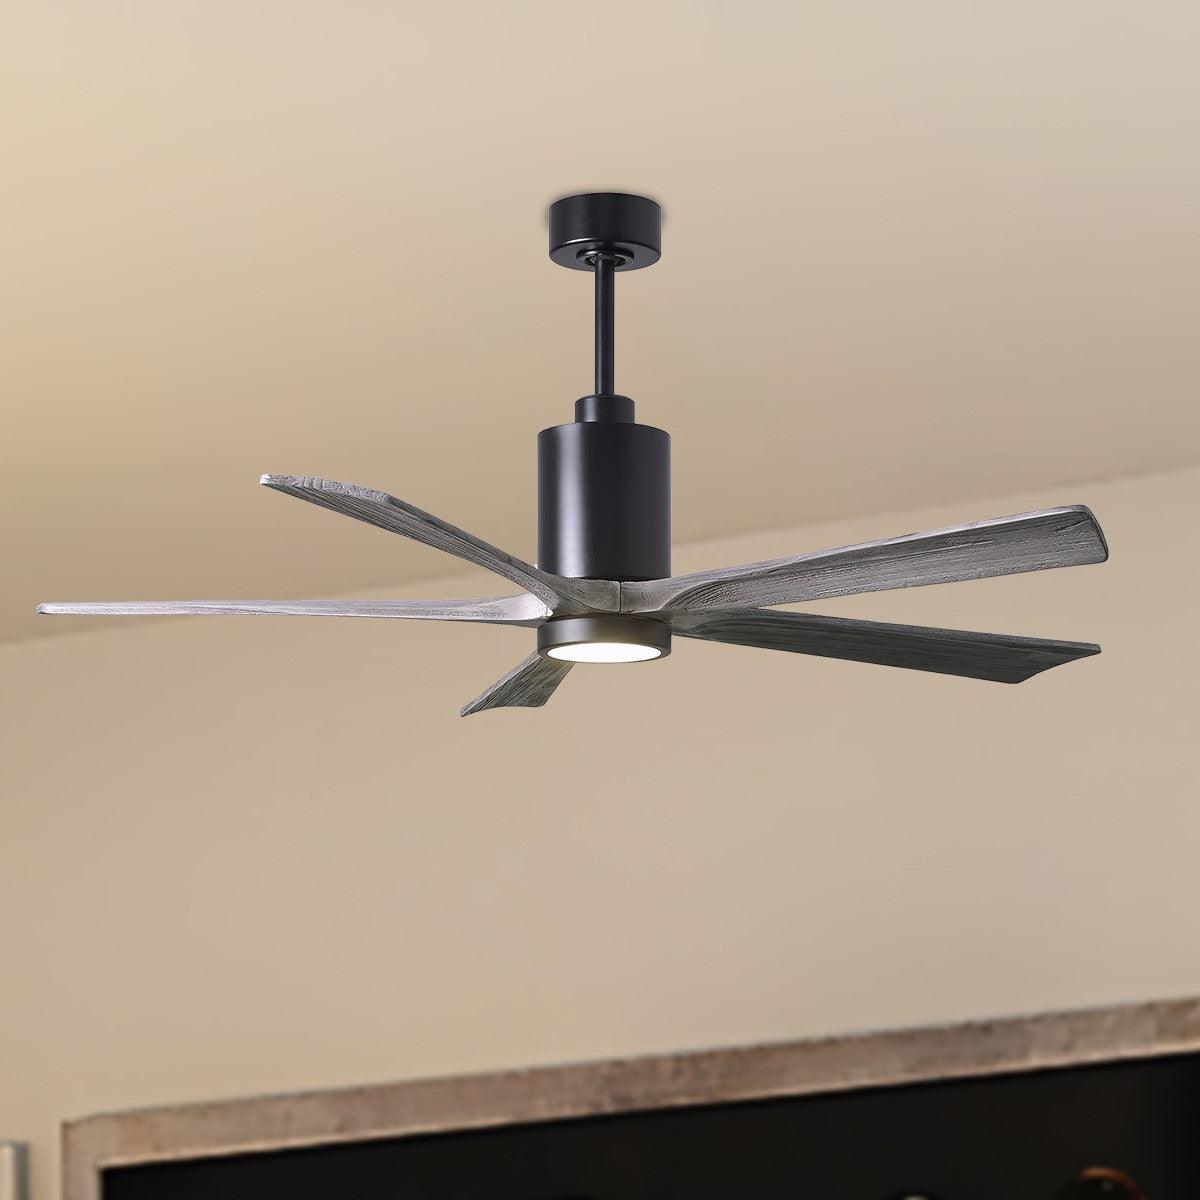 Patricia 60 Inch 5 Blades Modern Outdoor Ceiling Fan With Light, Wall And Remote Control Included